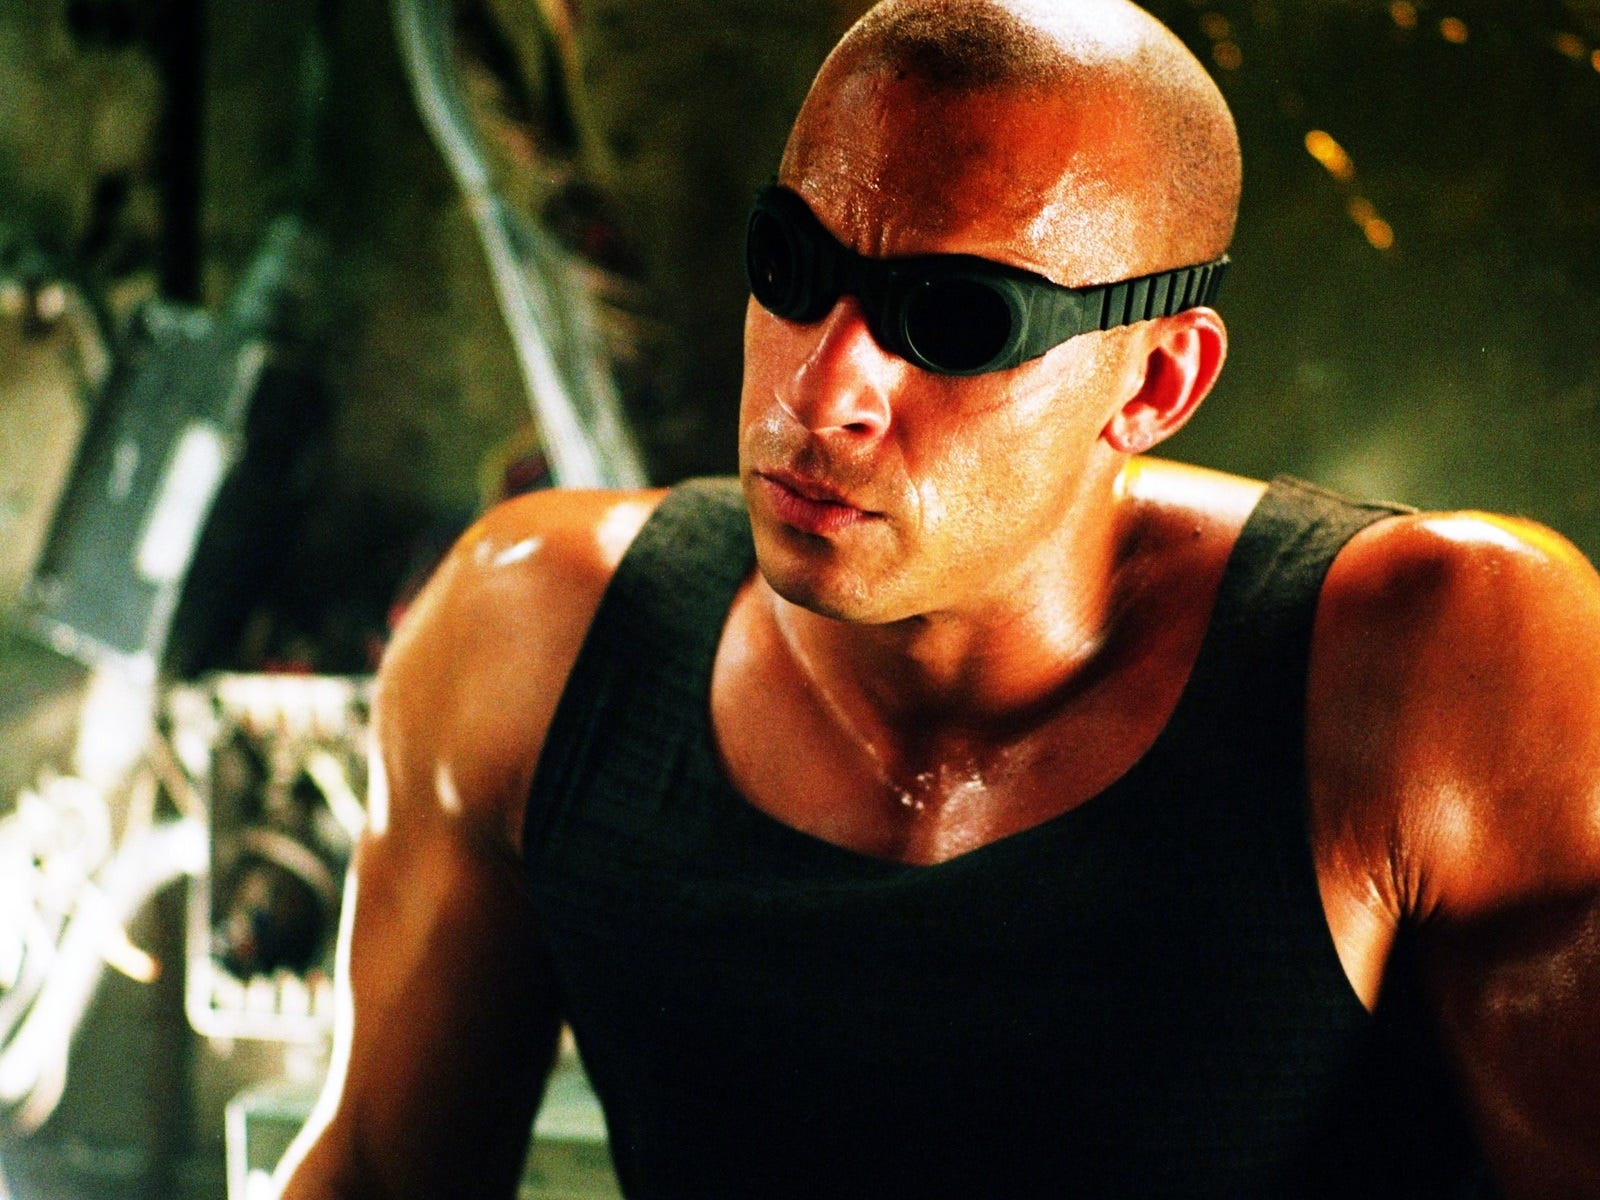 How 'Pitch Black' Turned Vin Diesel Into an Action Star